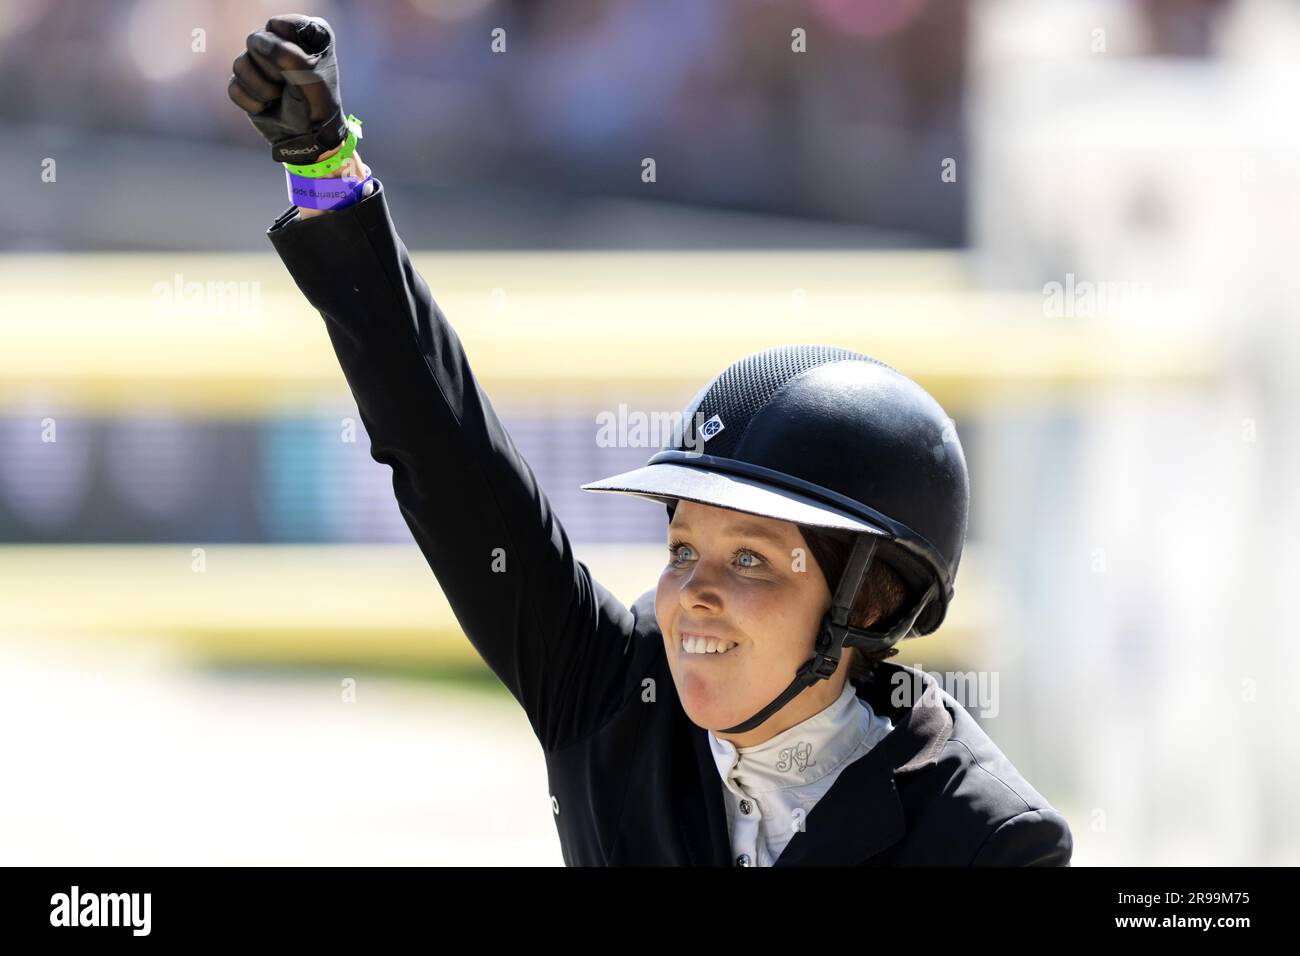 ROTTERDAM - Victoria Gulliksen with Mistral van de Vogelzang in action during the Nations Cup jumping at CHIO Rotterdam. The equestrian event takes place for the 74th time in the Kralingse Bos in Rotterdam. ANP SANDER KONING netherlands out - belgium out Stock Photo